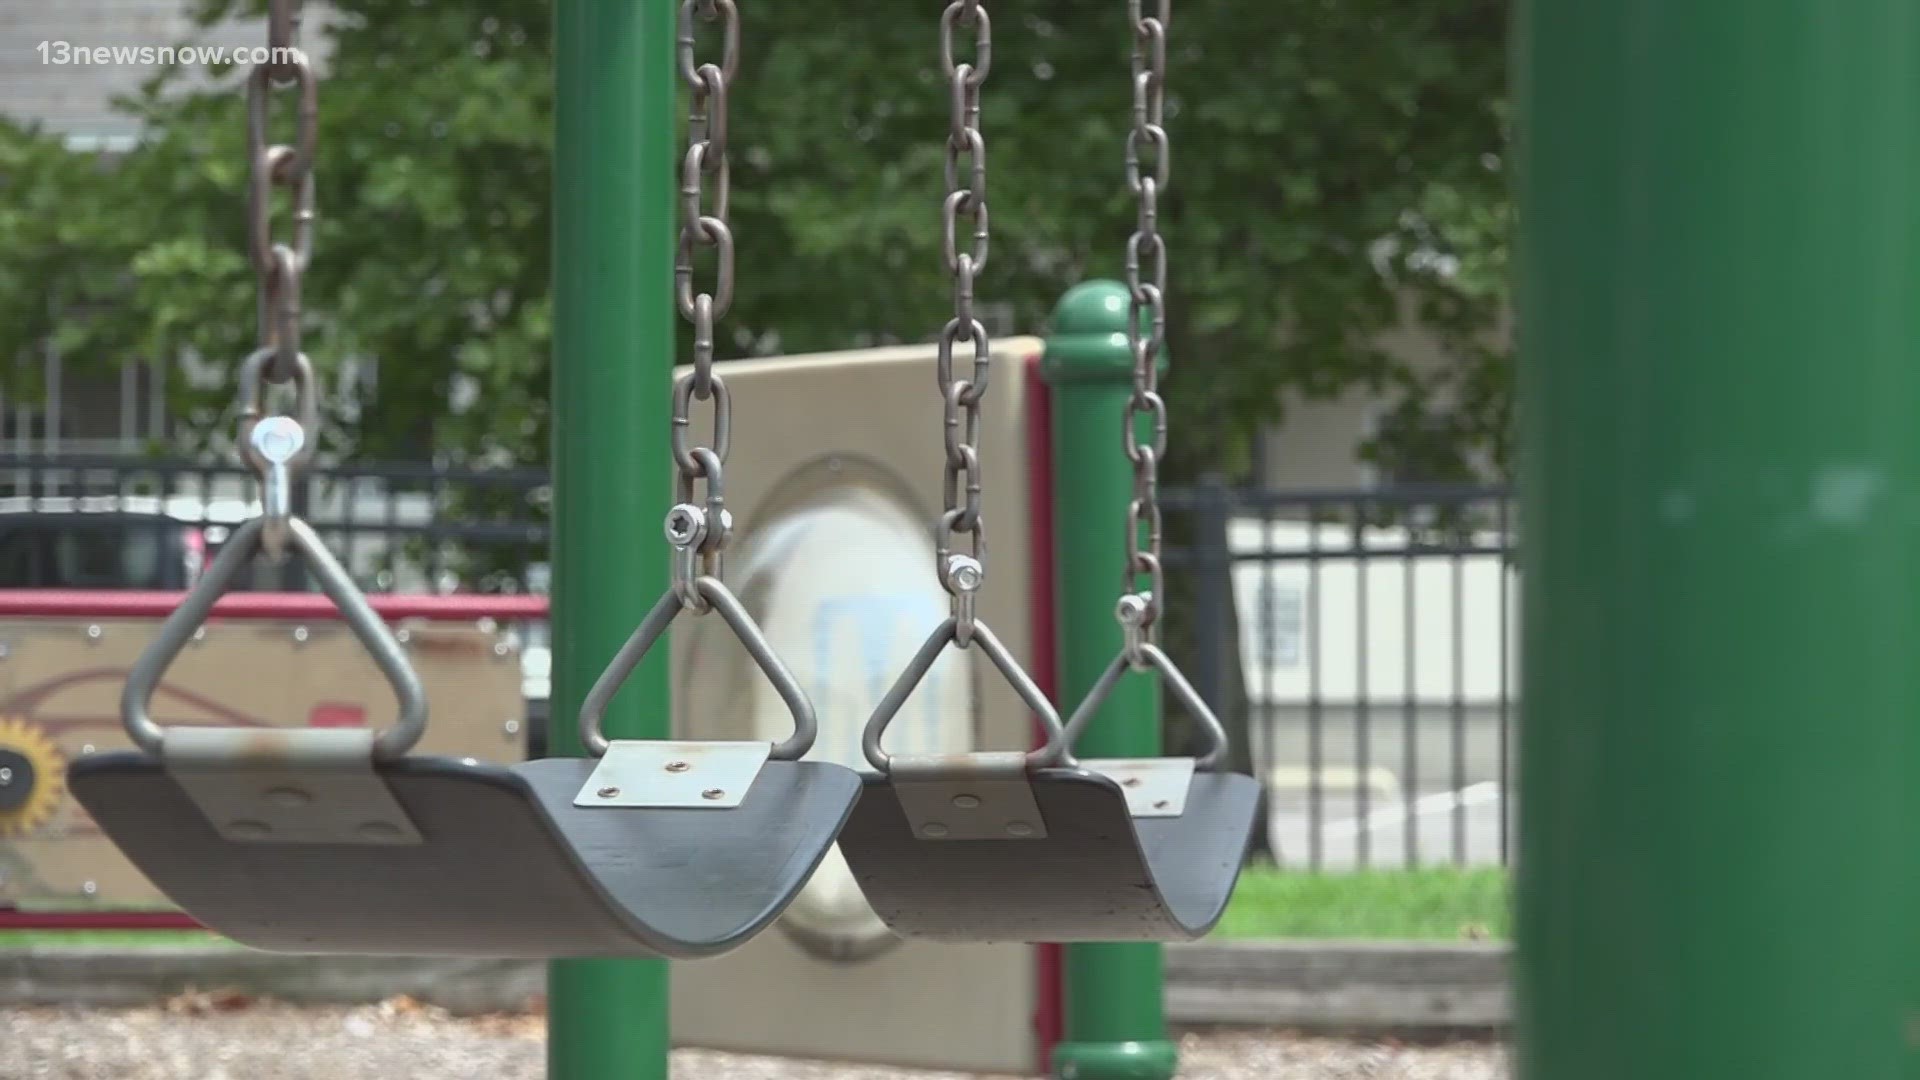 National research shows shortfalls in Virginia's foster care system.